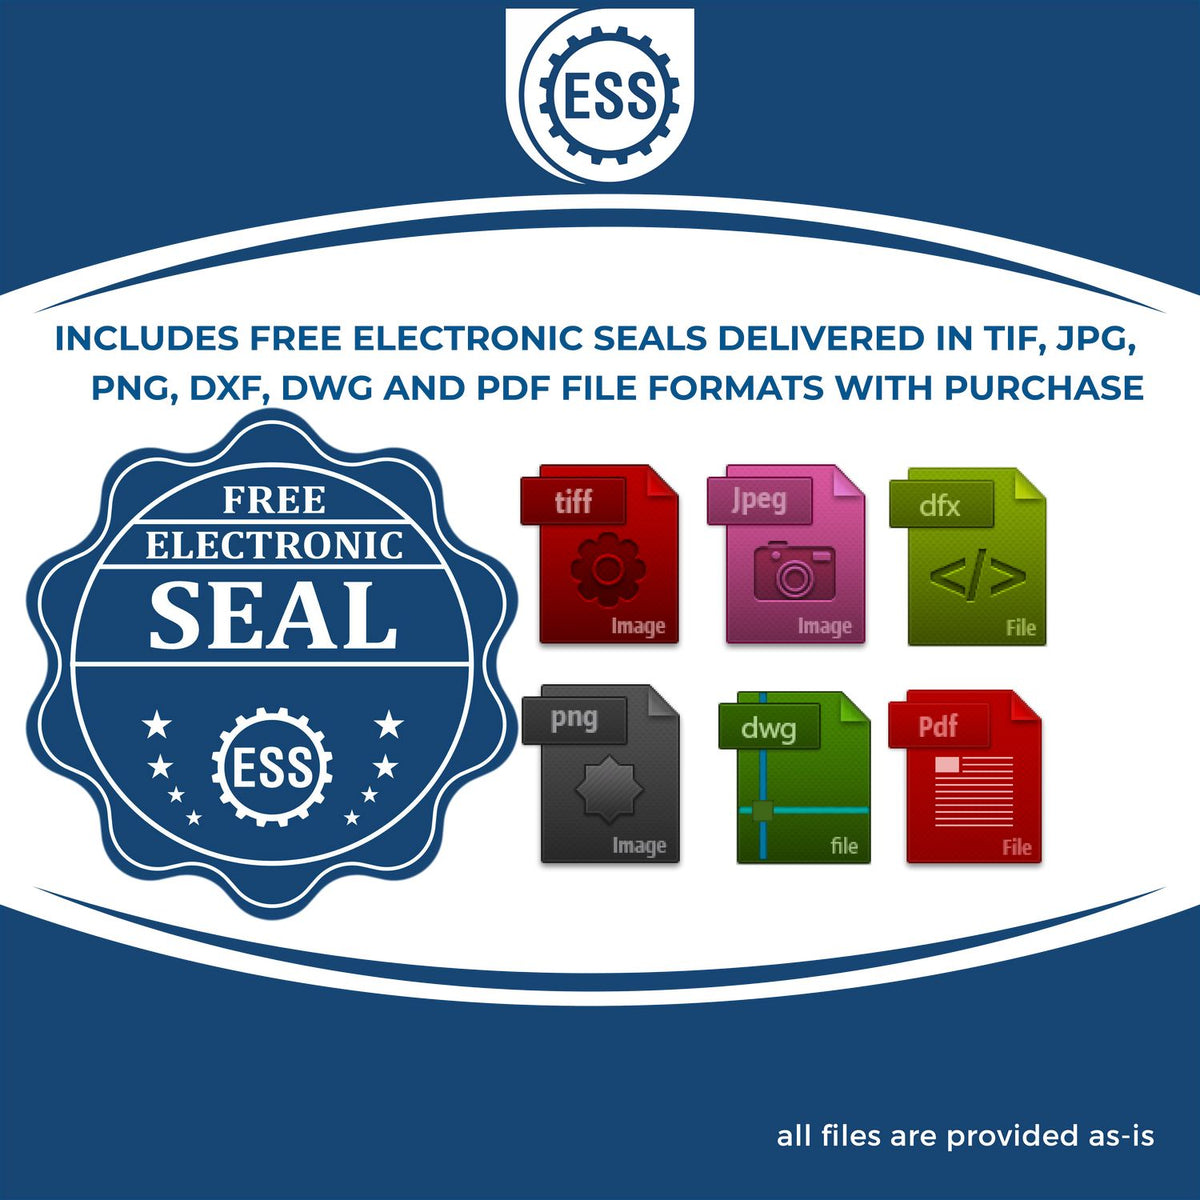 An infographic for the free electronic seal for the Heavy Duty Cast Iron Alabama Architect Embosser illustrating the different file type icons such as DXF, DWG, TIF, JPG and PNG.